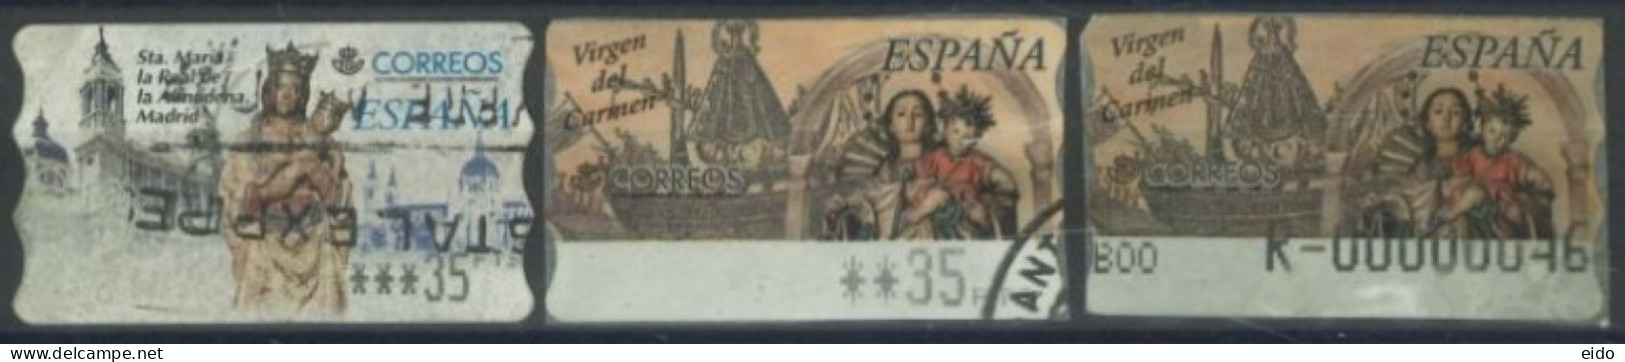 SPAIN - 2000 - ST. MARIA  AND VIRGIN OF CARMEN . STAMPS LABELS SET OF 3 OF DIFFERENT VALUES, USED . - Usados